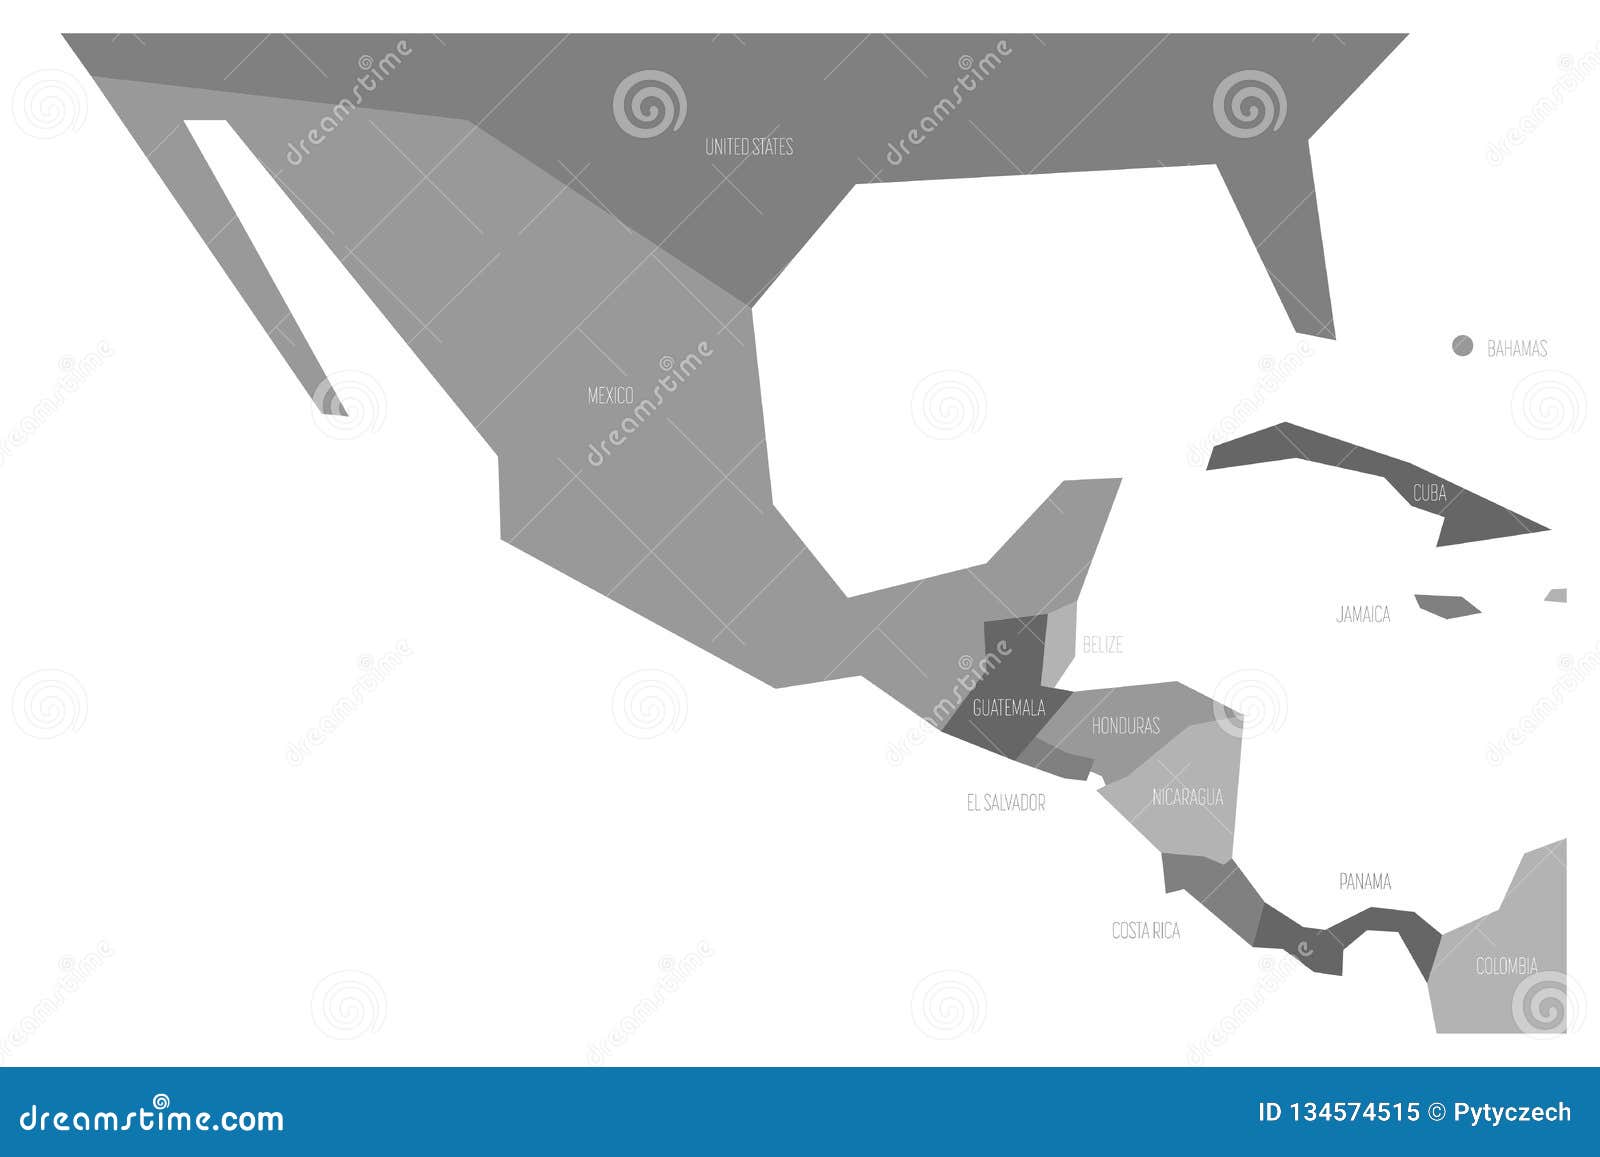 political map of mexico and central amercia. simlified schematic flat  map in four shades of grey